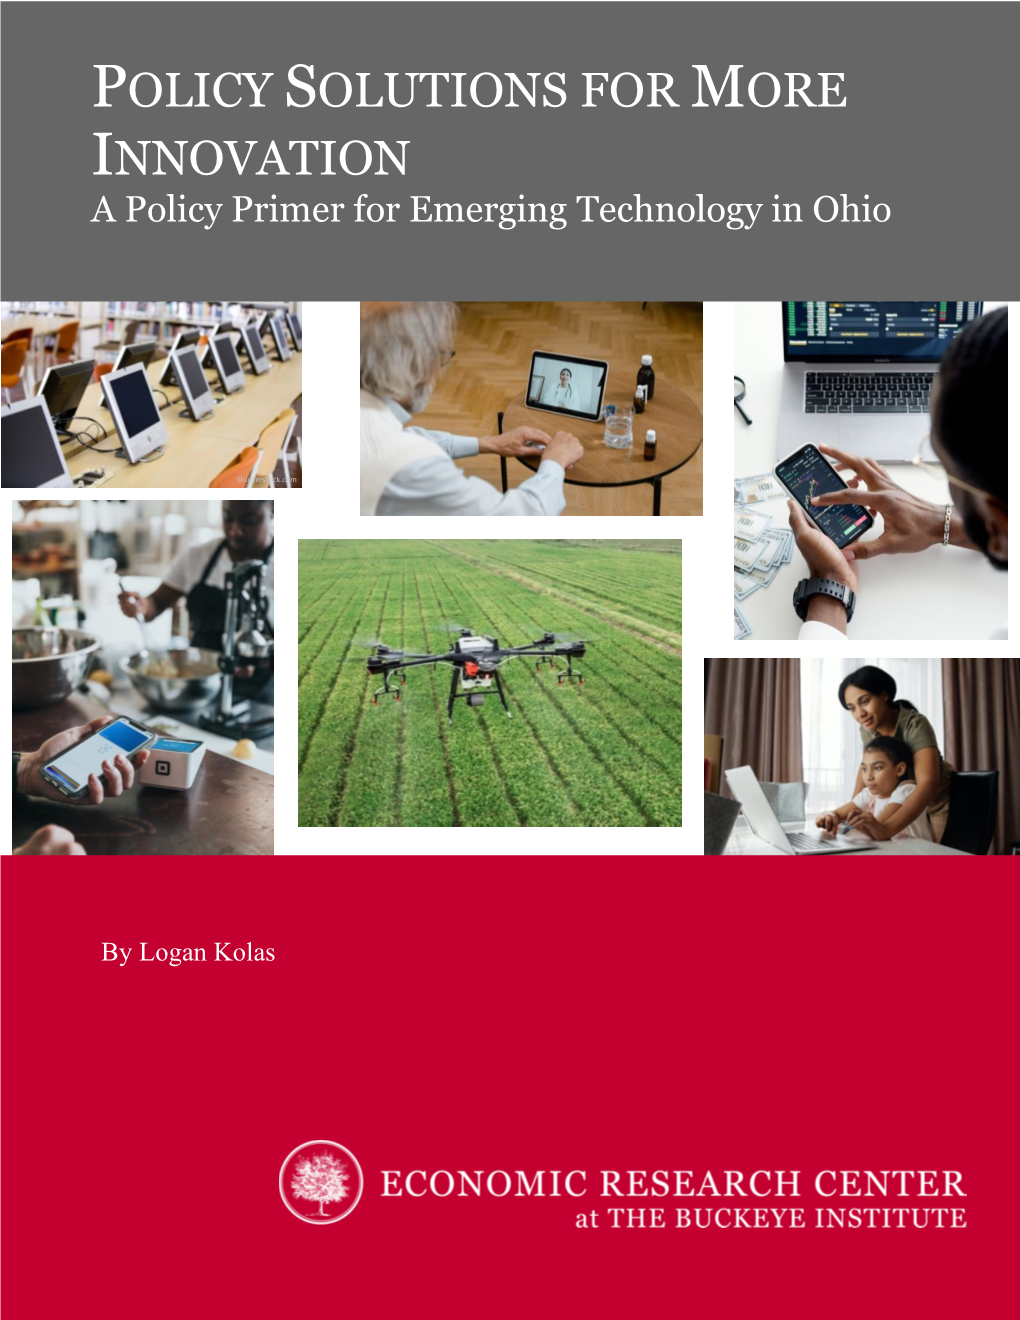 Policy Solutions for More Innovation: Build a Regulatory Sandbox for Financial Technology Innovators, the Buckeye Institute, March 29, 2021